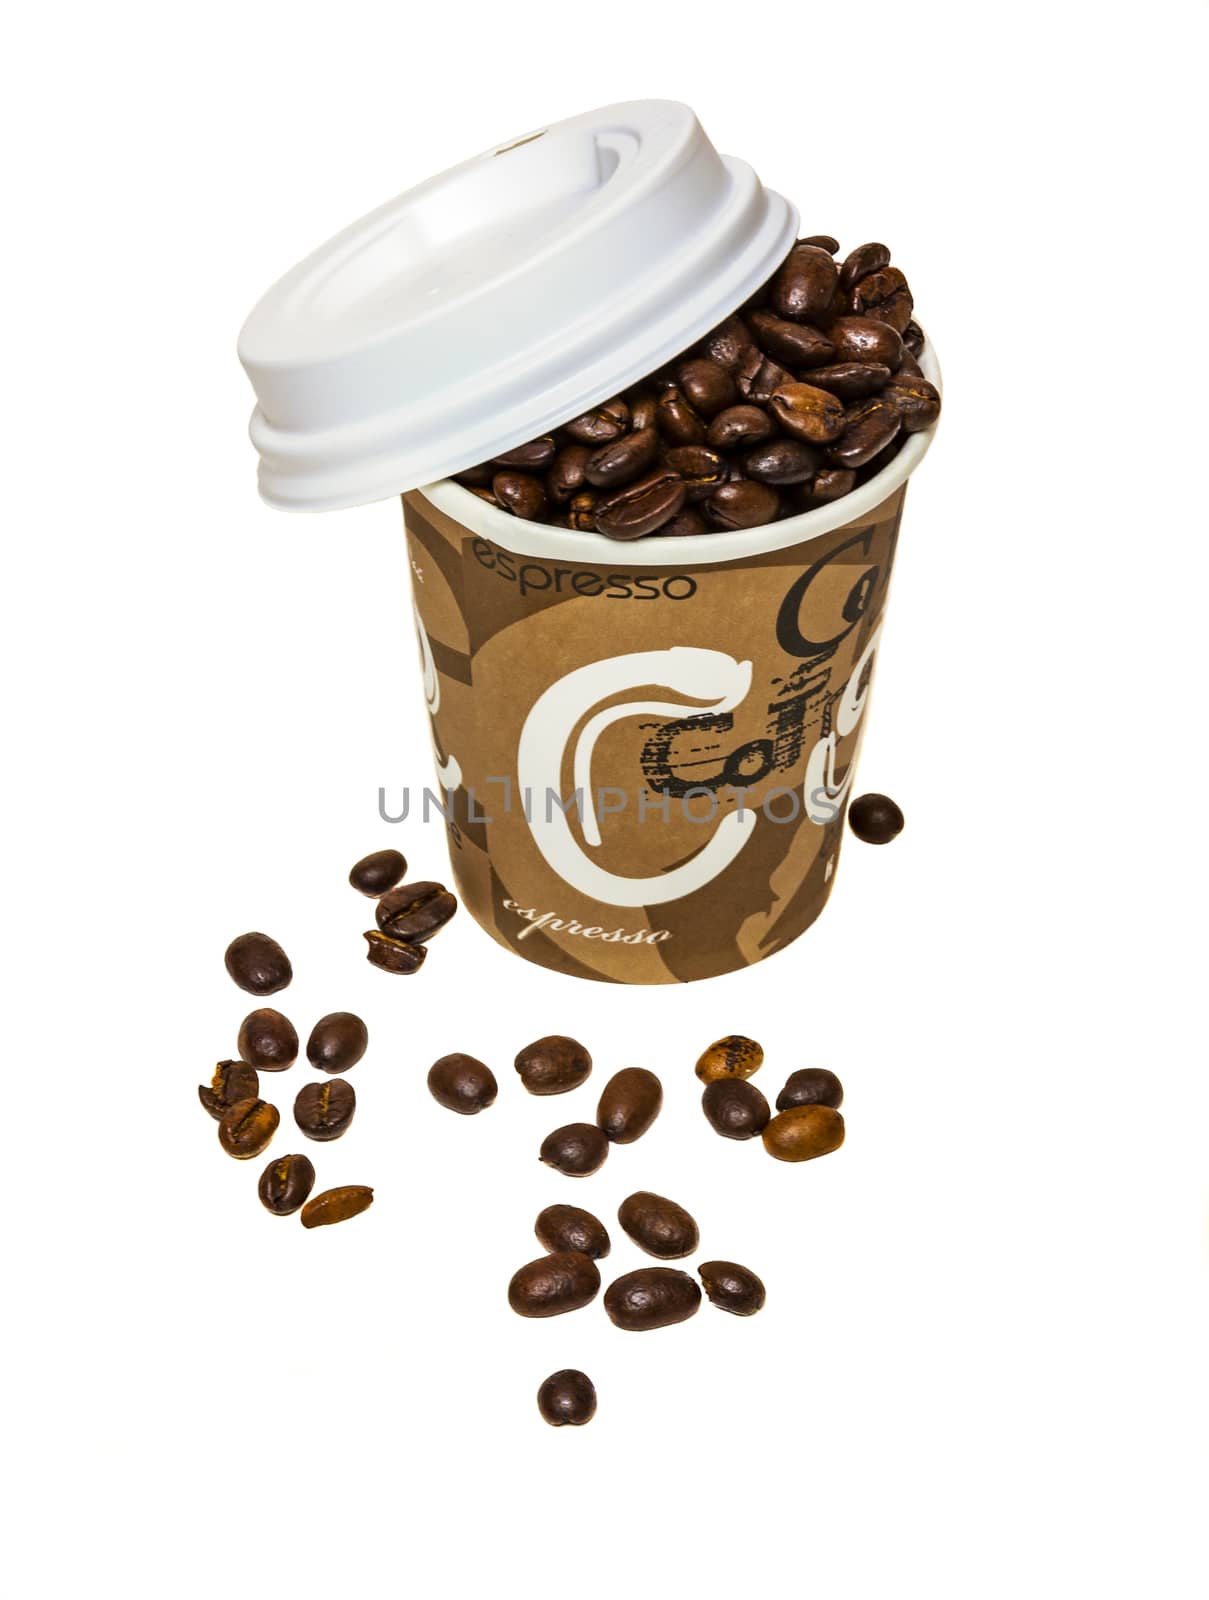 Paper cup of coffee with a plastic cap filled with coffee beans by Grommik